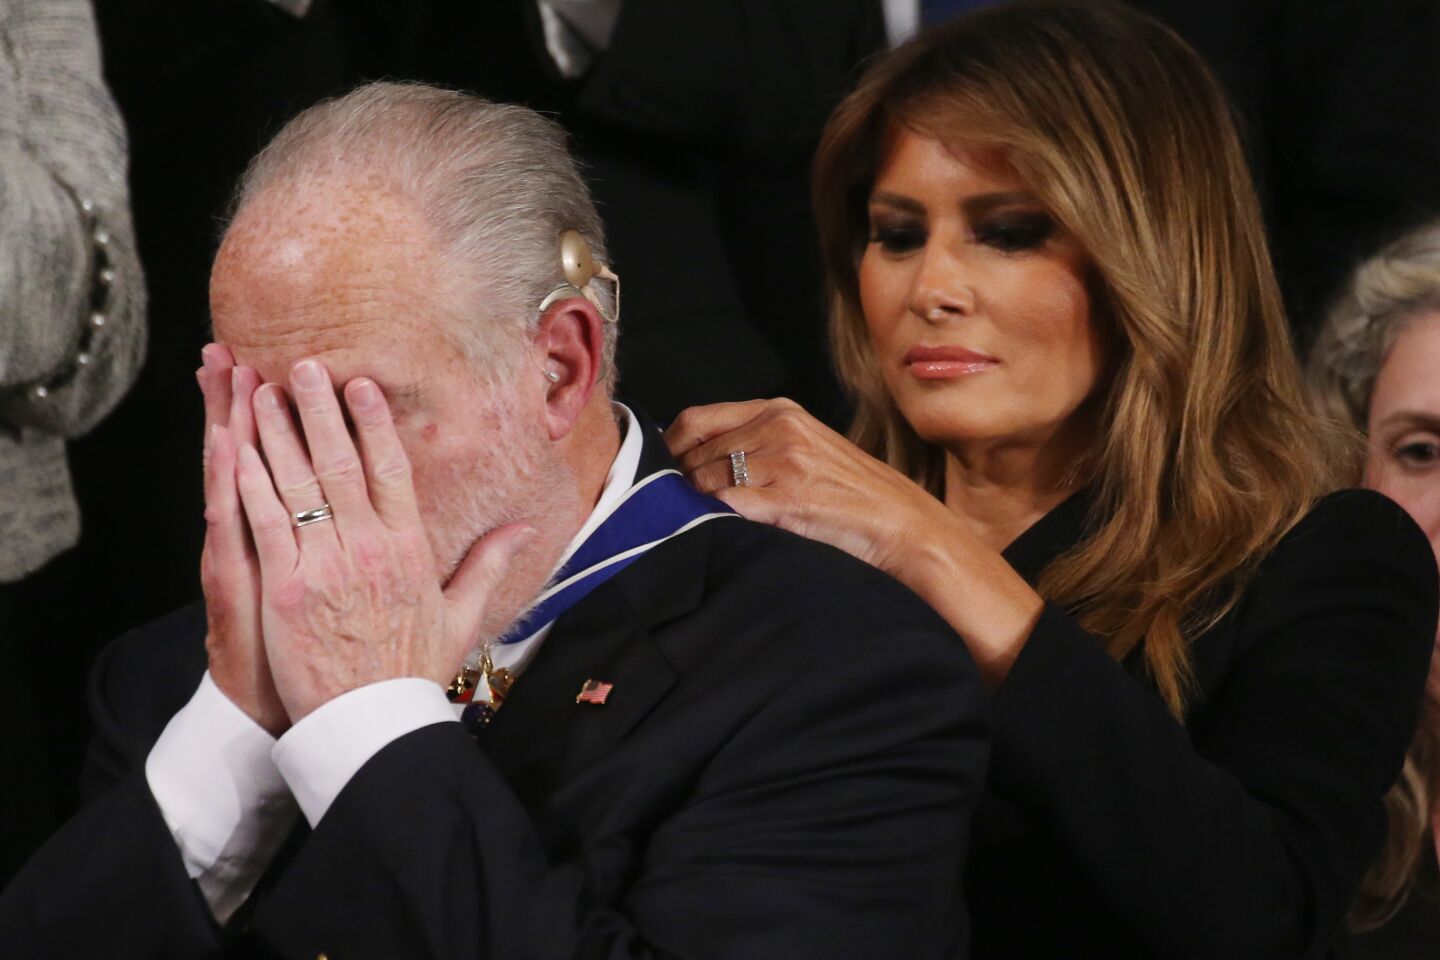 Melania Trump puts the medal around Limbaugh's neck as he covers his face with both hands.